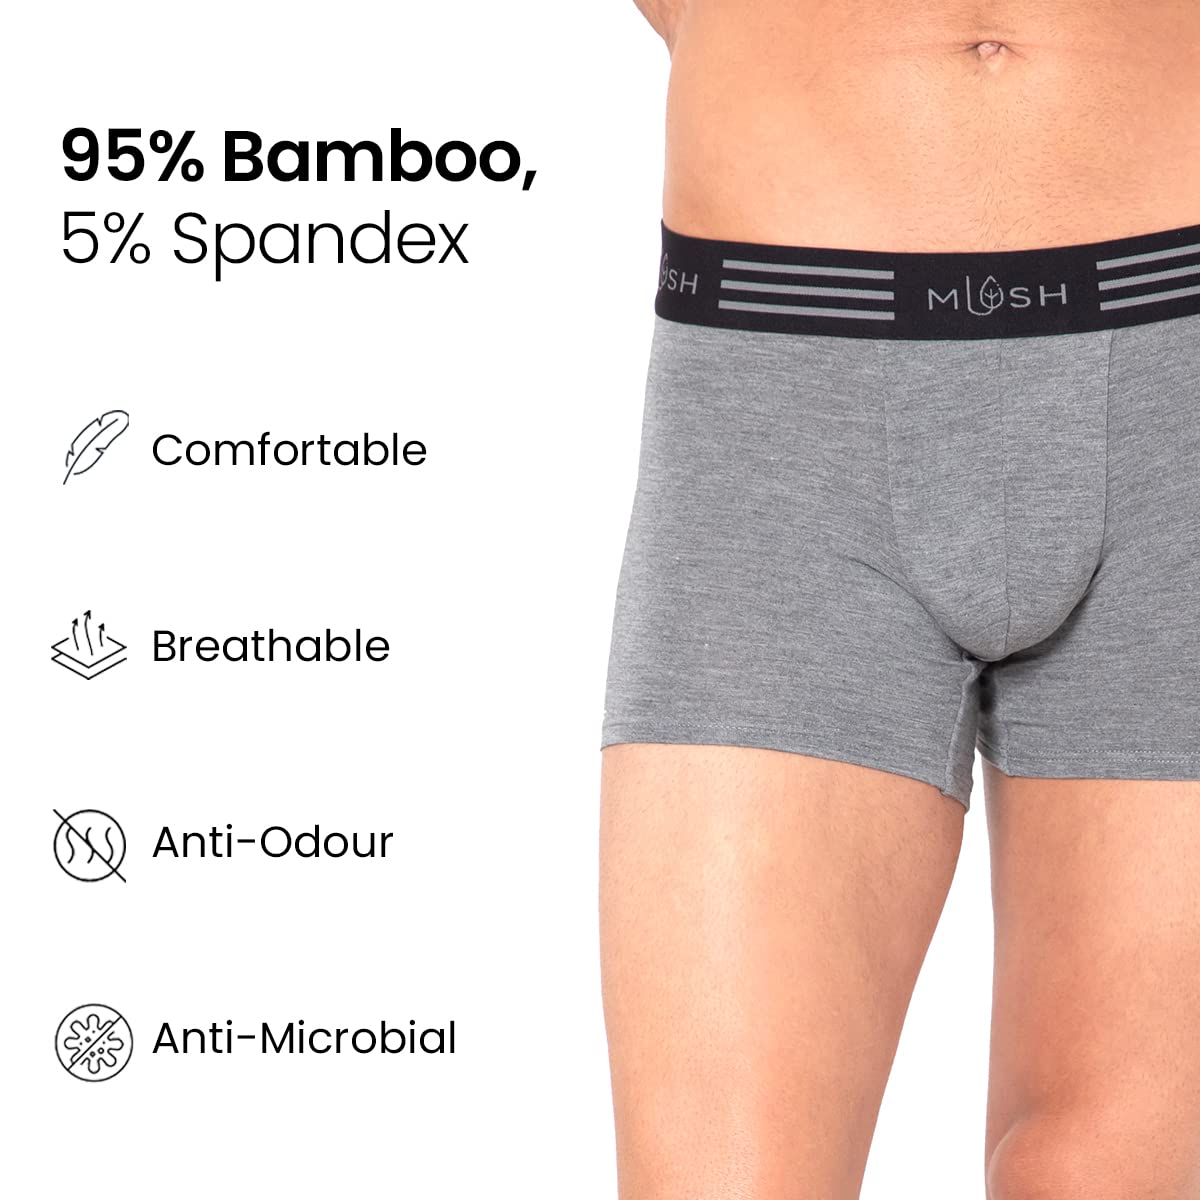 Mush Ultra Soft, Breathable, Feather Light Men's Bamboo Trunk || Naturally Anti-Odor and Anti-Microbial Bamboo Innerwear Pack of 3 (S, Grey)